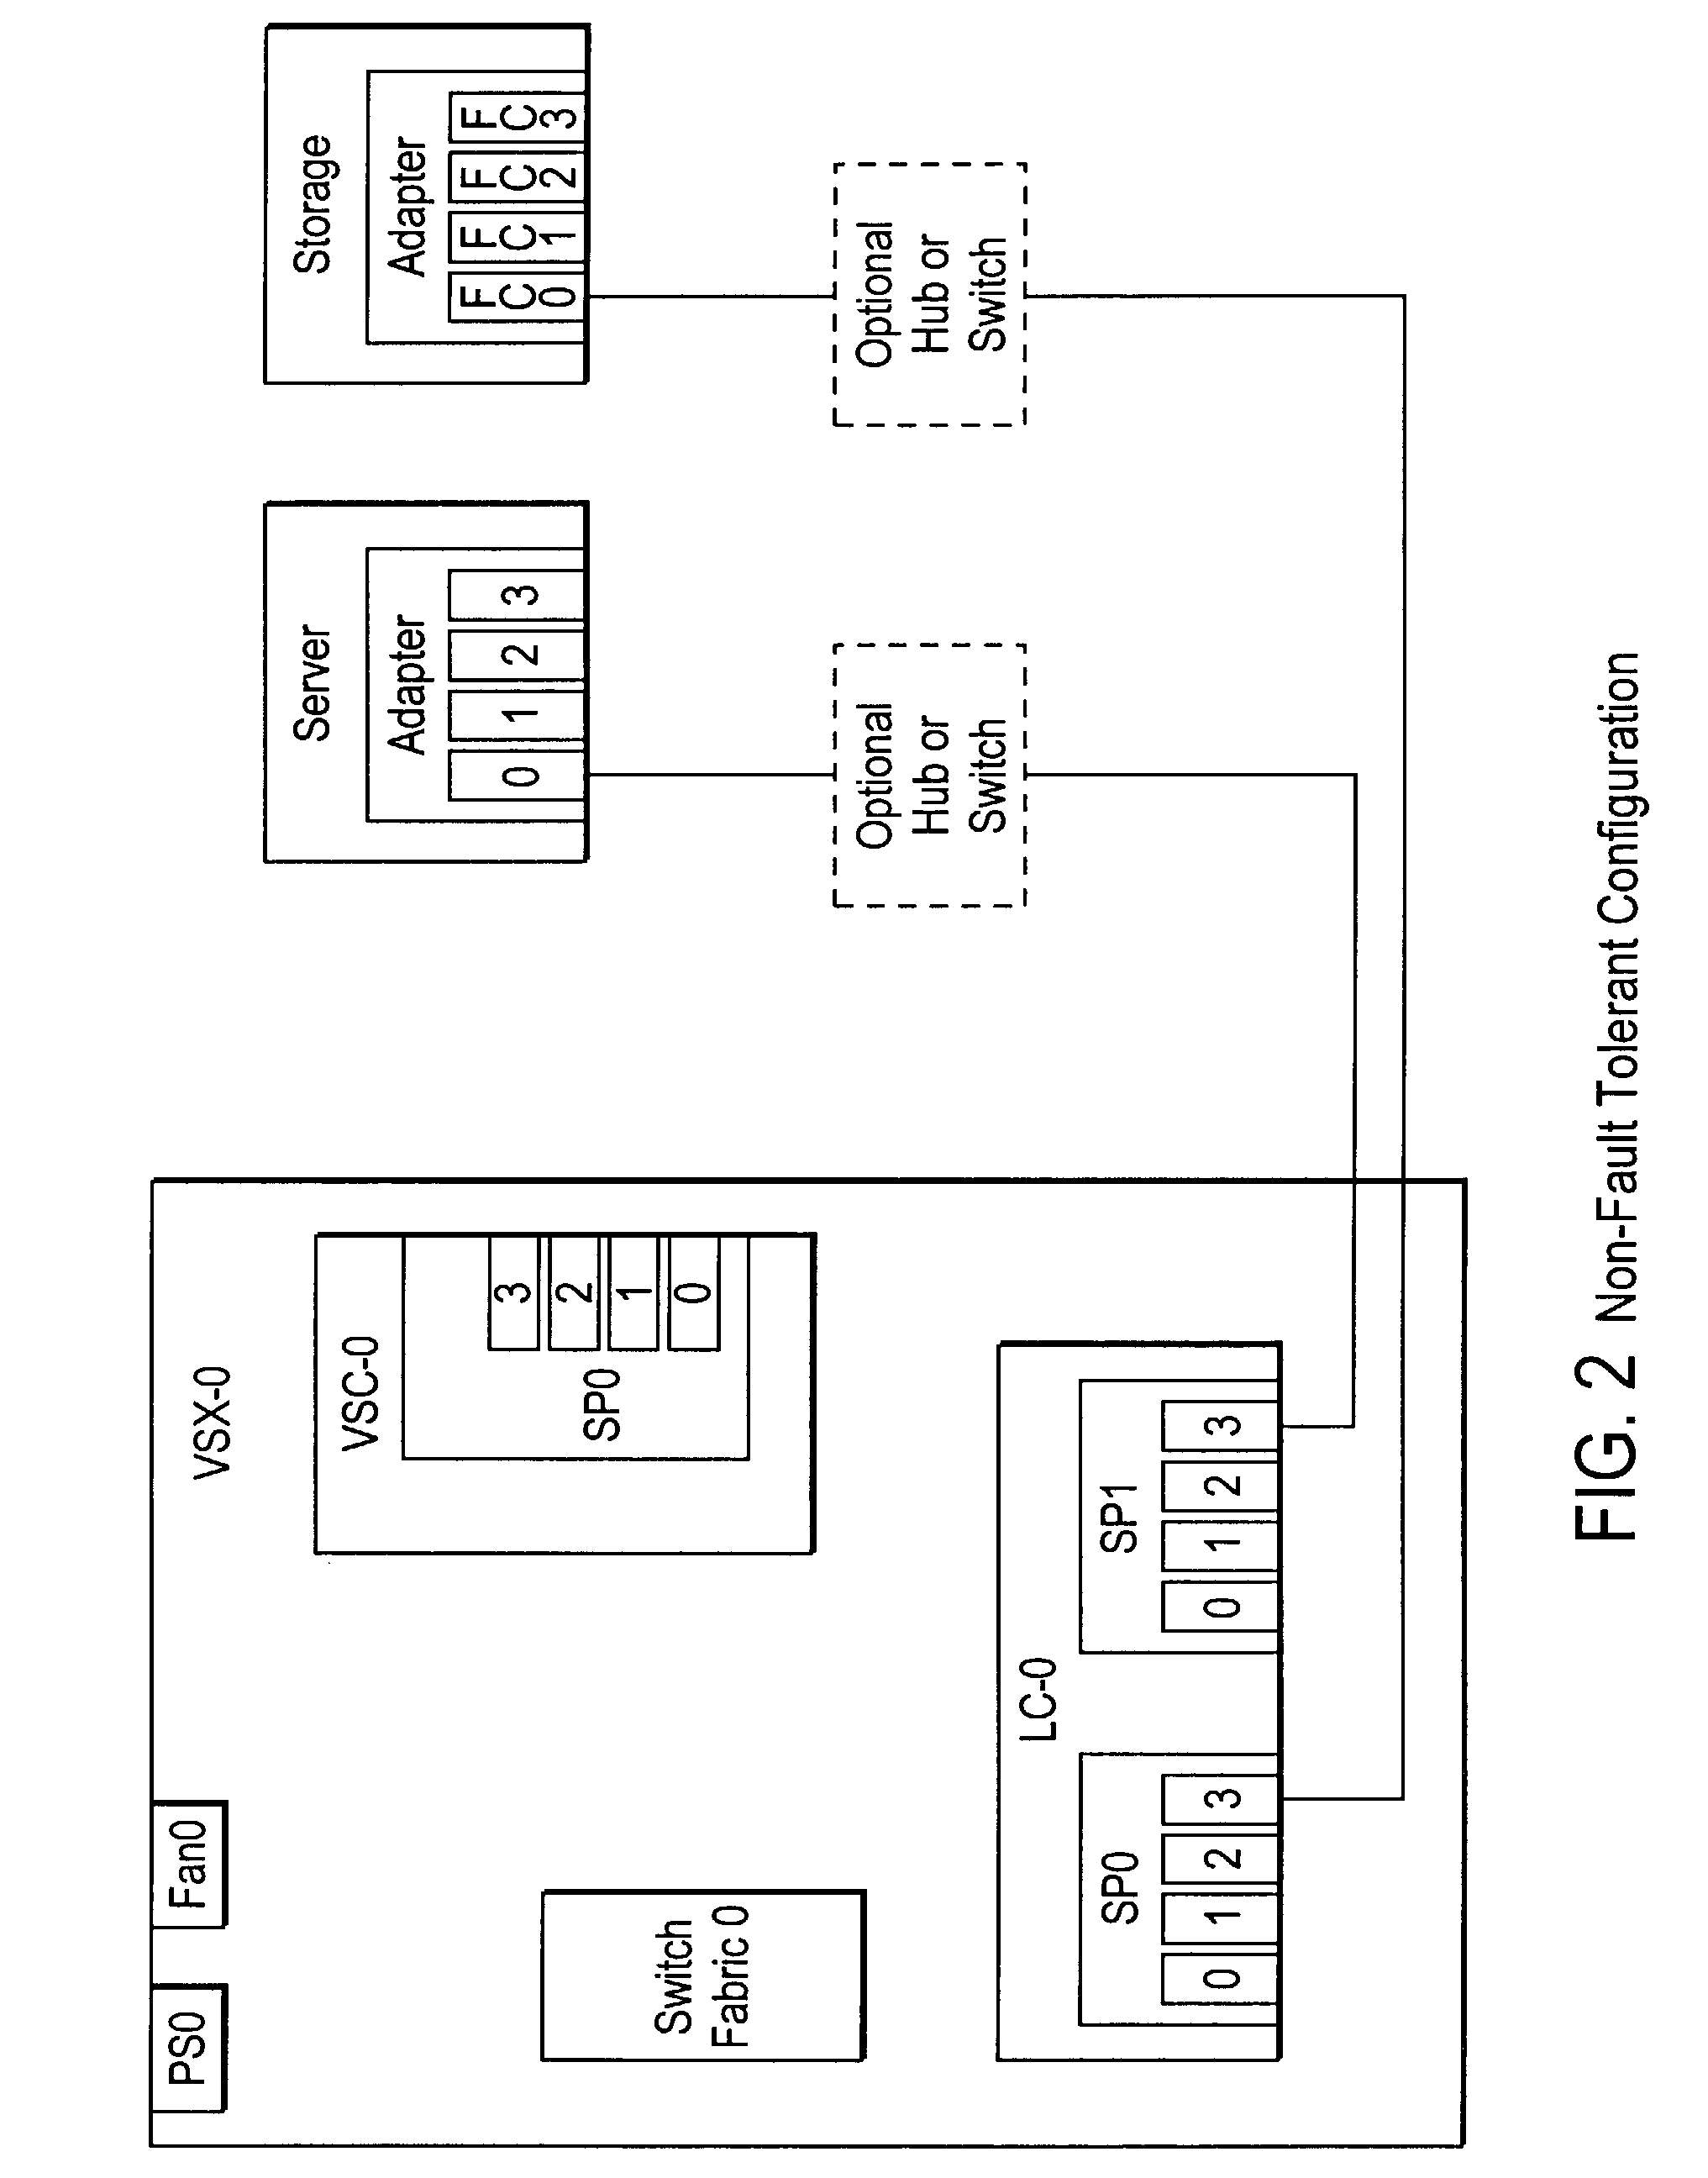 Failover processing in a storage system